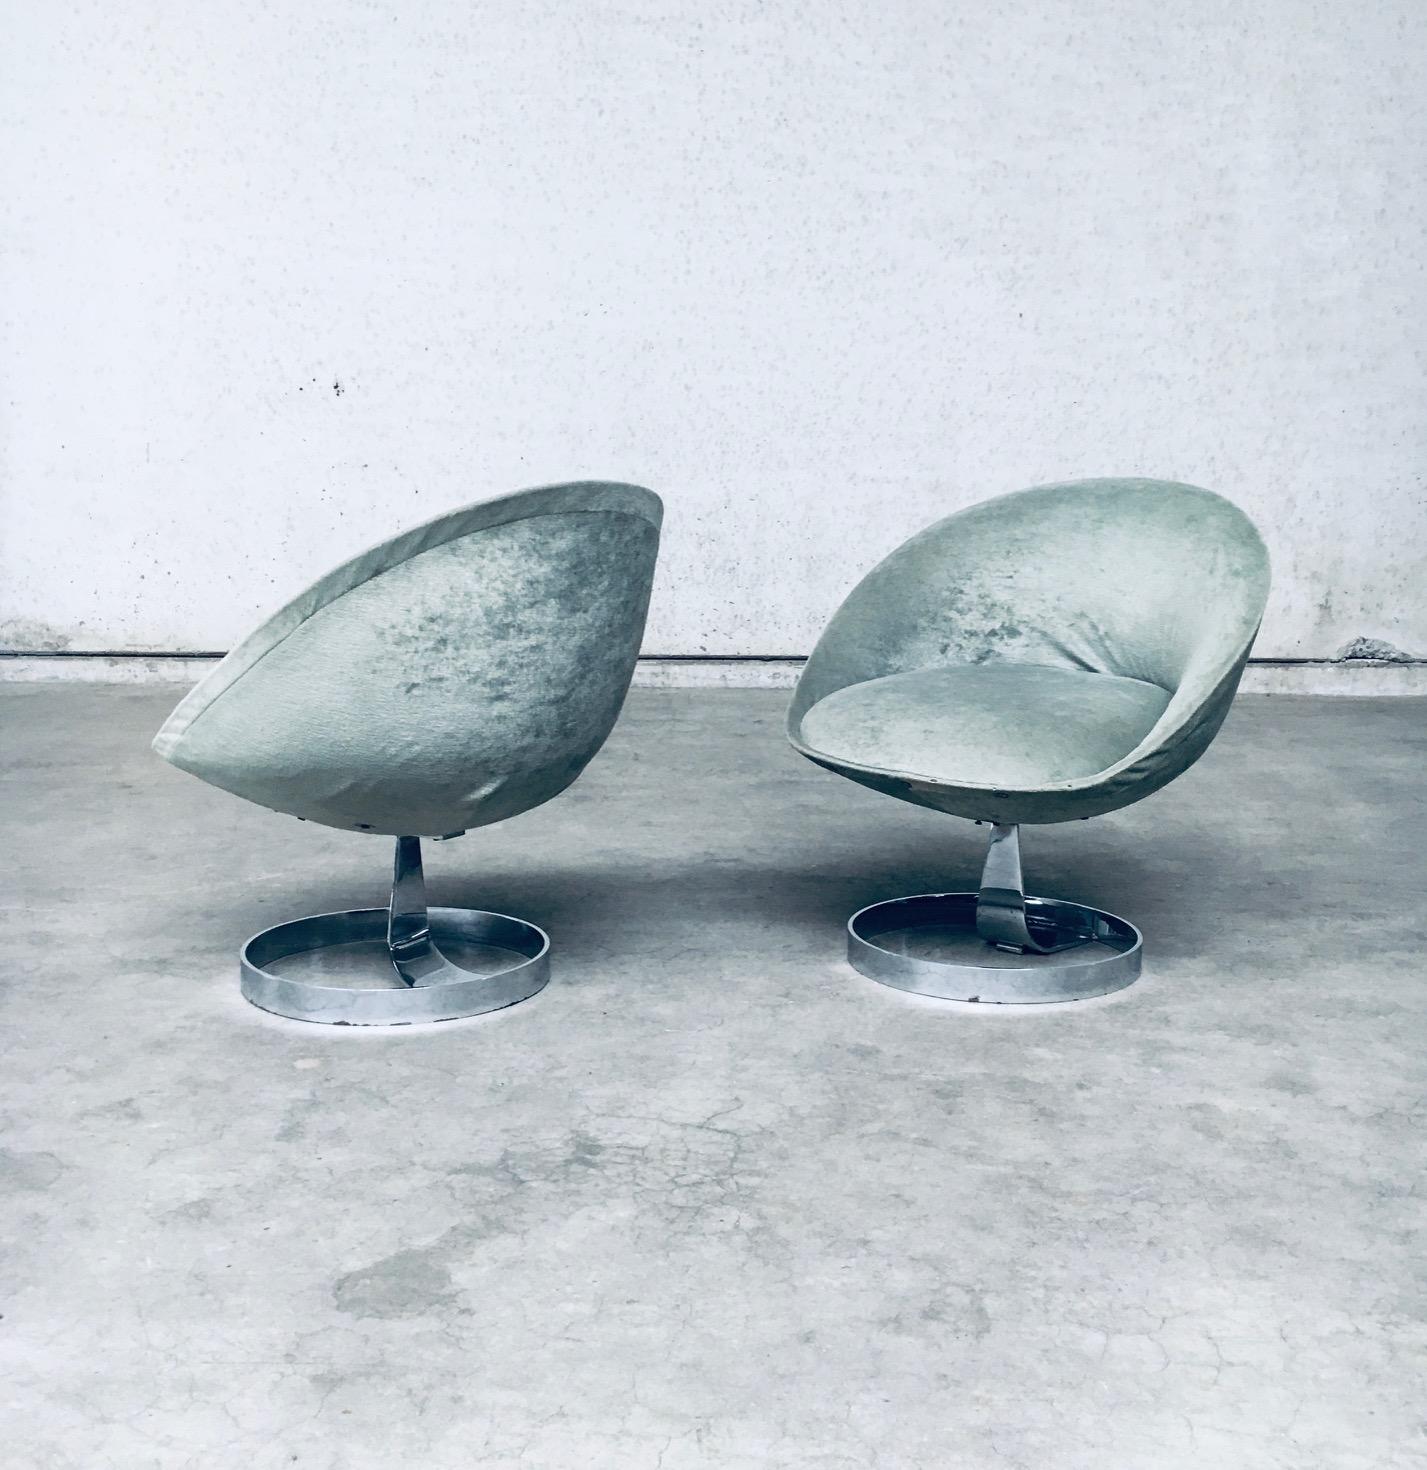 Steel Space Age SPHERE POD Lounge Chair set, France 1960's For Sale